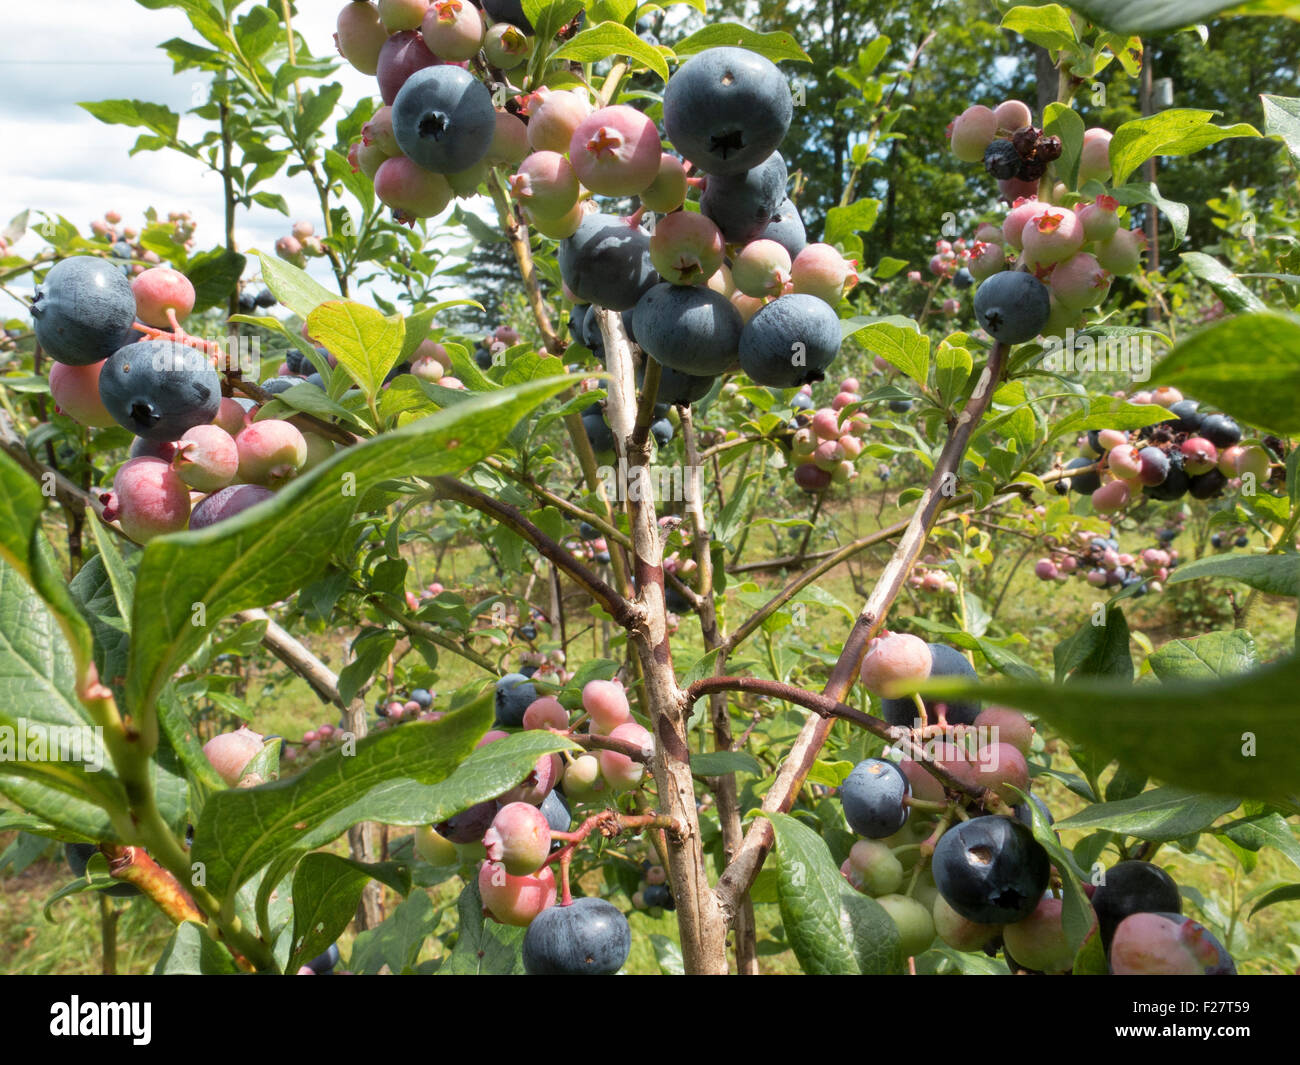 Bunch of blueberries with ripe and unripe berries growing in pick your own farm in      Florida, Massachusetts. Stock Photo